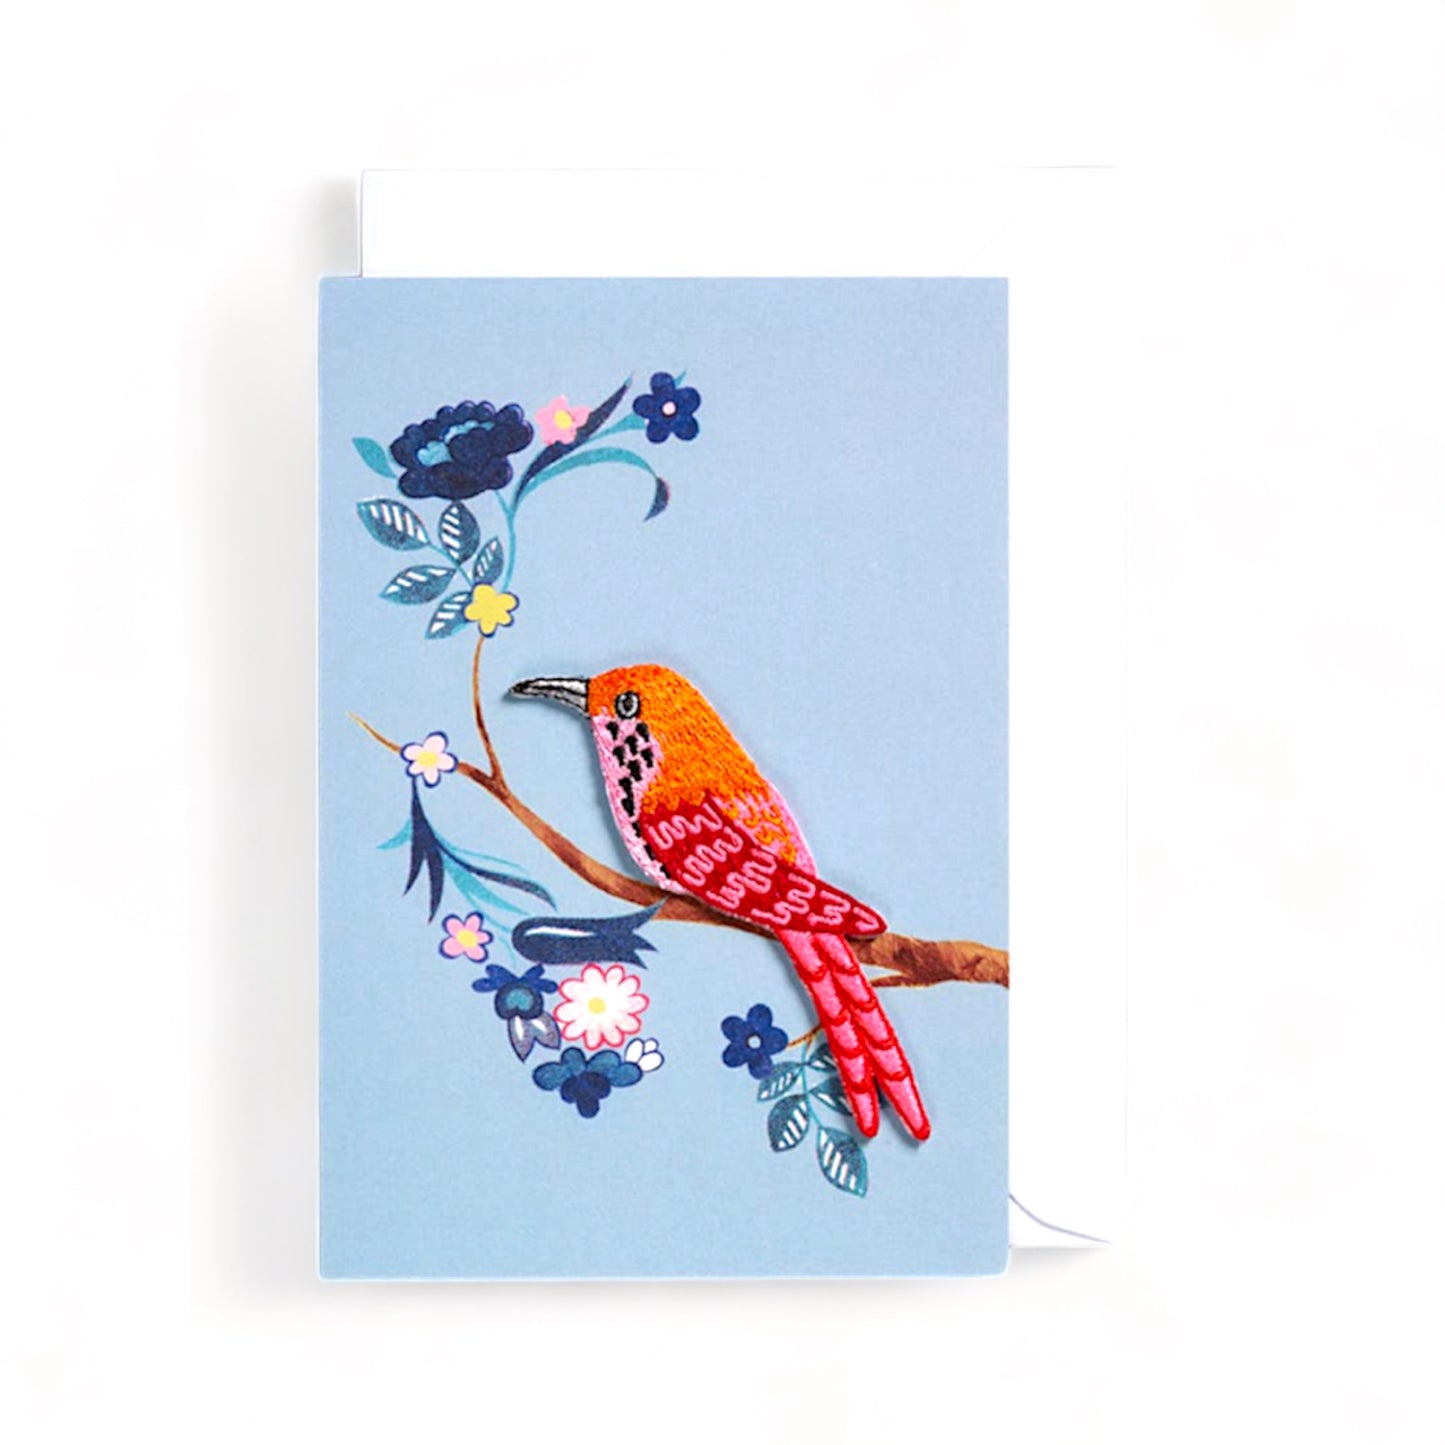 Embroidered Bird Patch - Greeting Card - Periwinkle